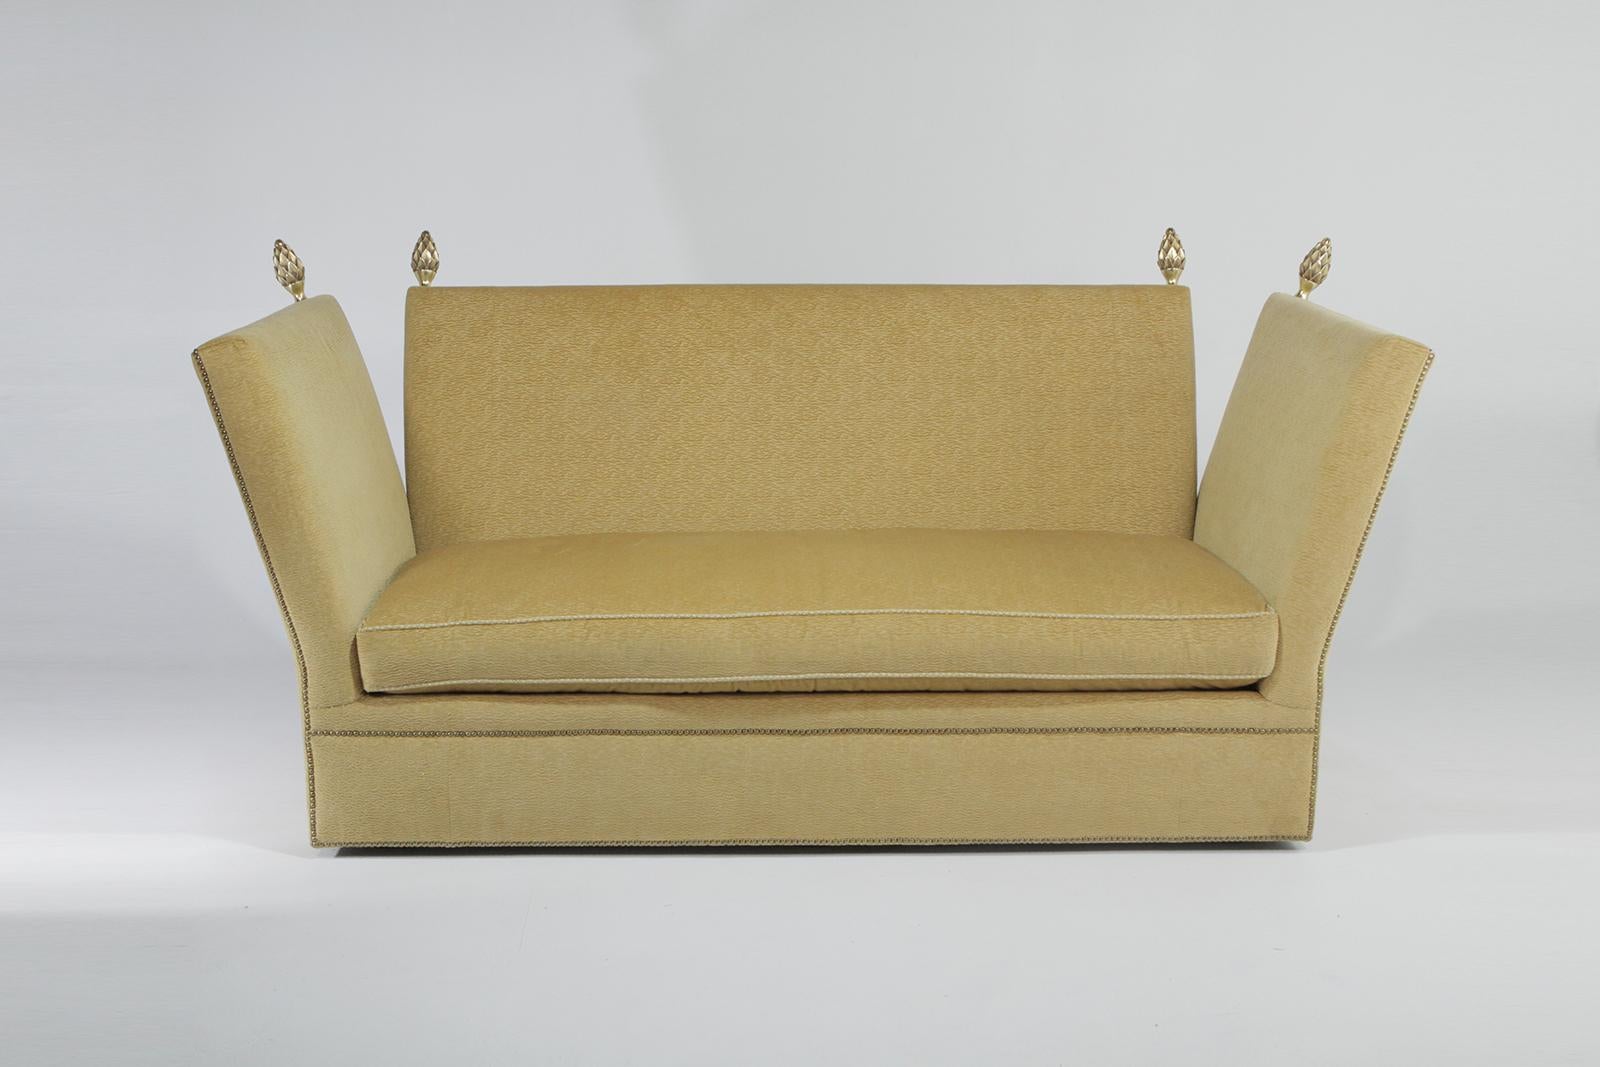 Very glamorous Classic Knole style sofa upholstered in a beautiful soft shade of goldish yellow silk velvet. The sides do not lower but are static. The seat cushion is detachable. Gorgeous brass nailhead detailing and gilded pine cone finials as